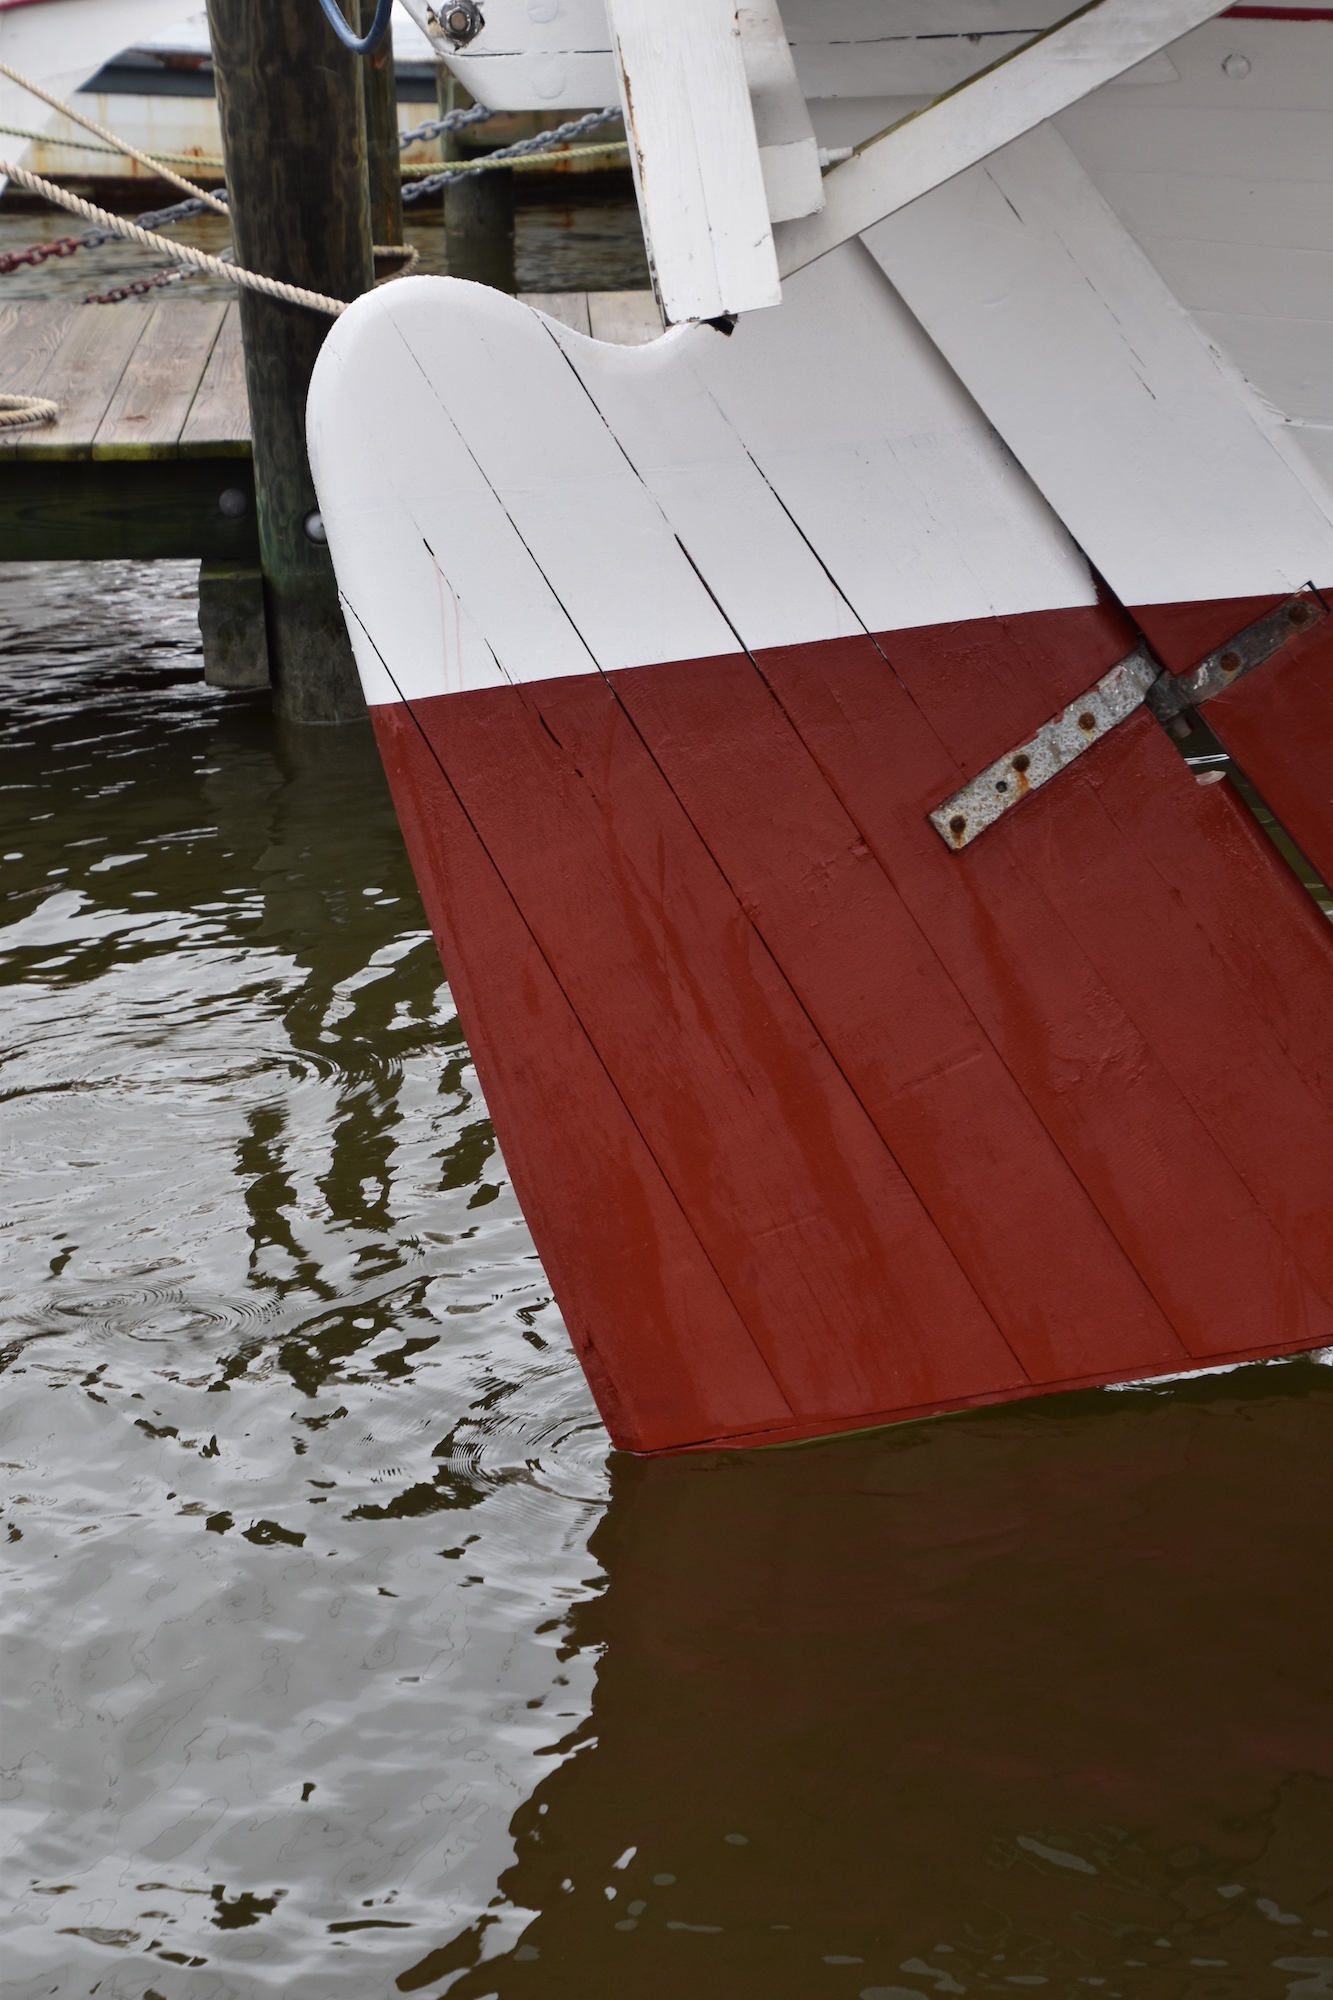  Bugeye  Edna Lockwood’s  rudder touches the Miles River again on Saturday, Oct. 27, at the Chesapeake Bay Maritime Museum. 